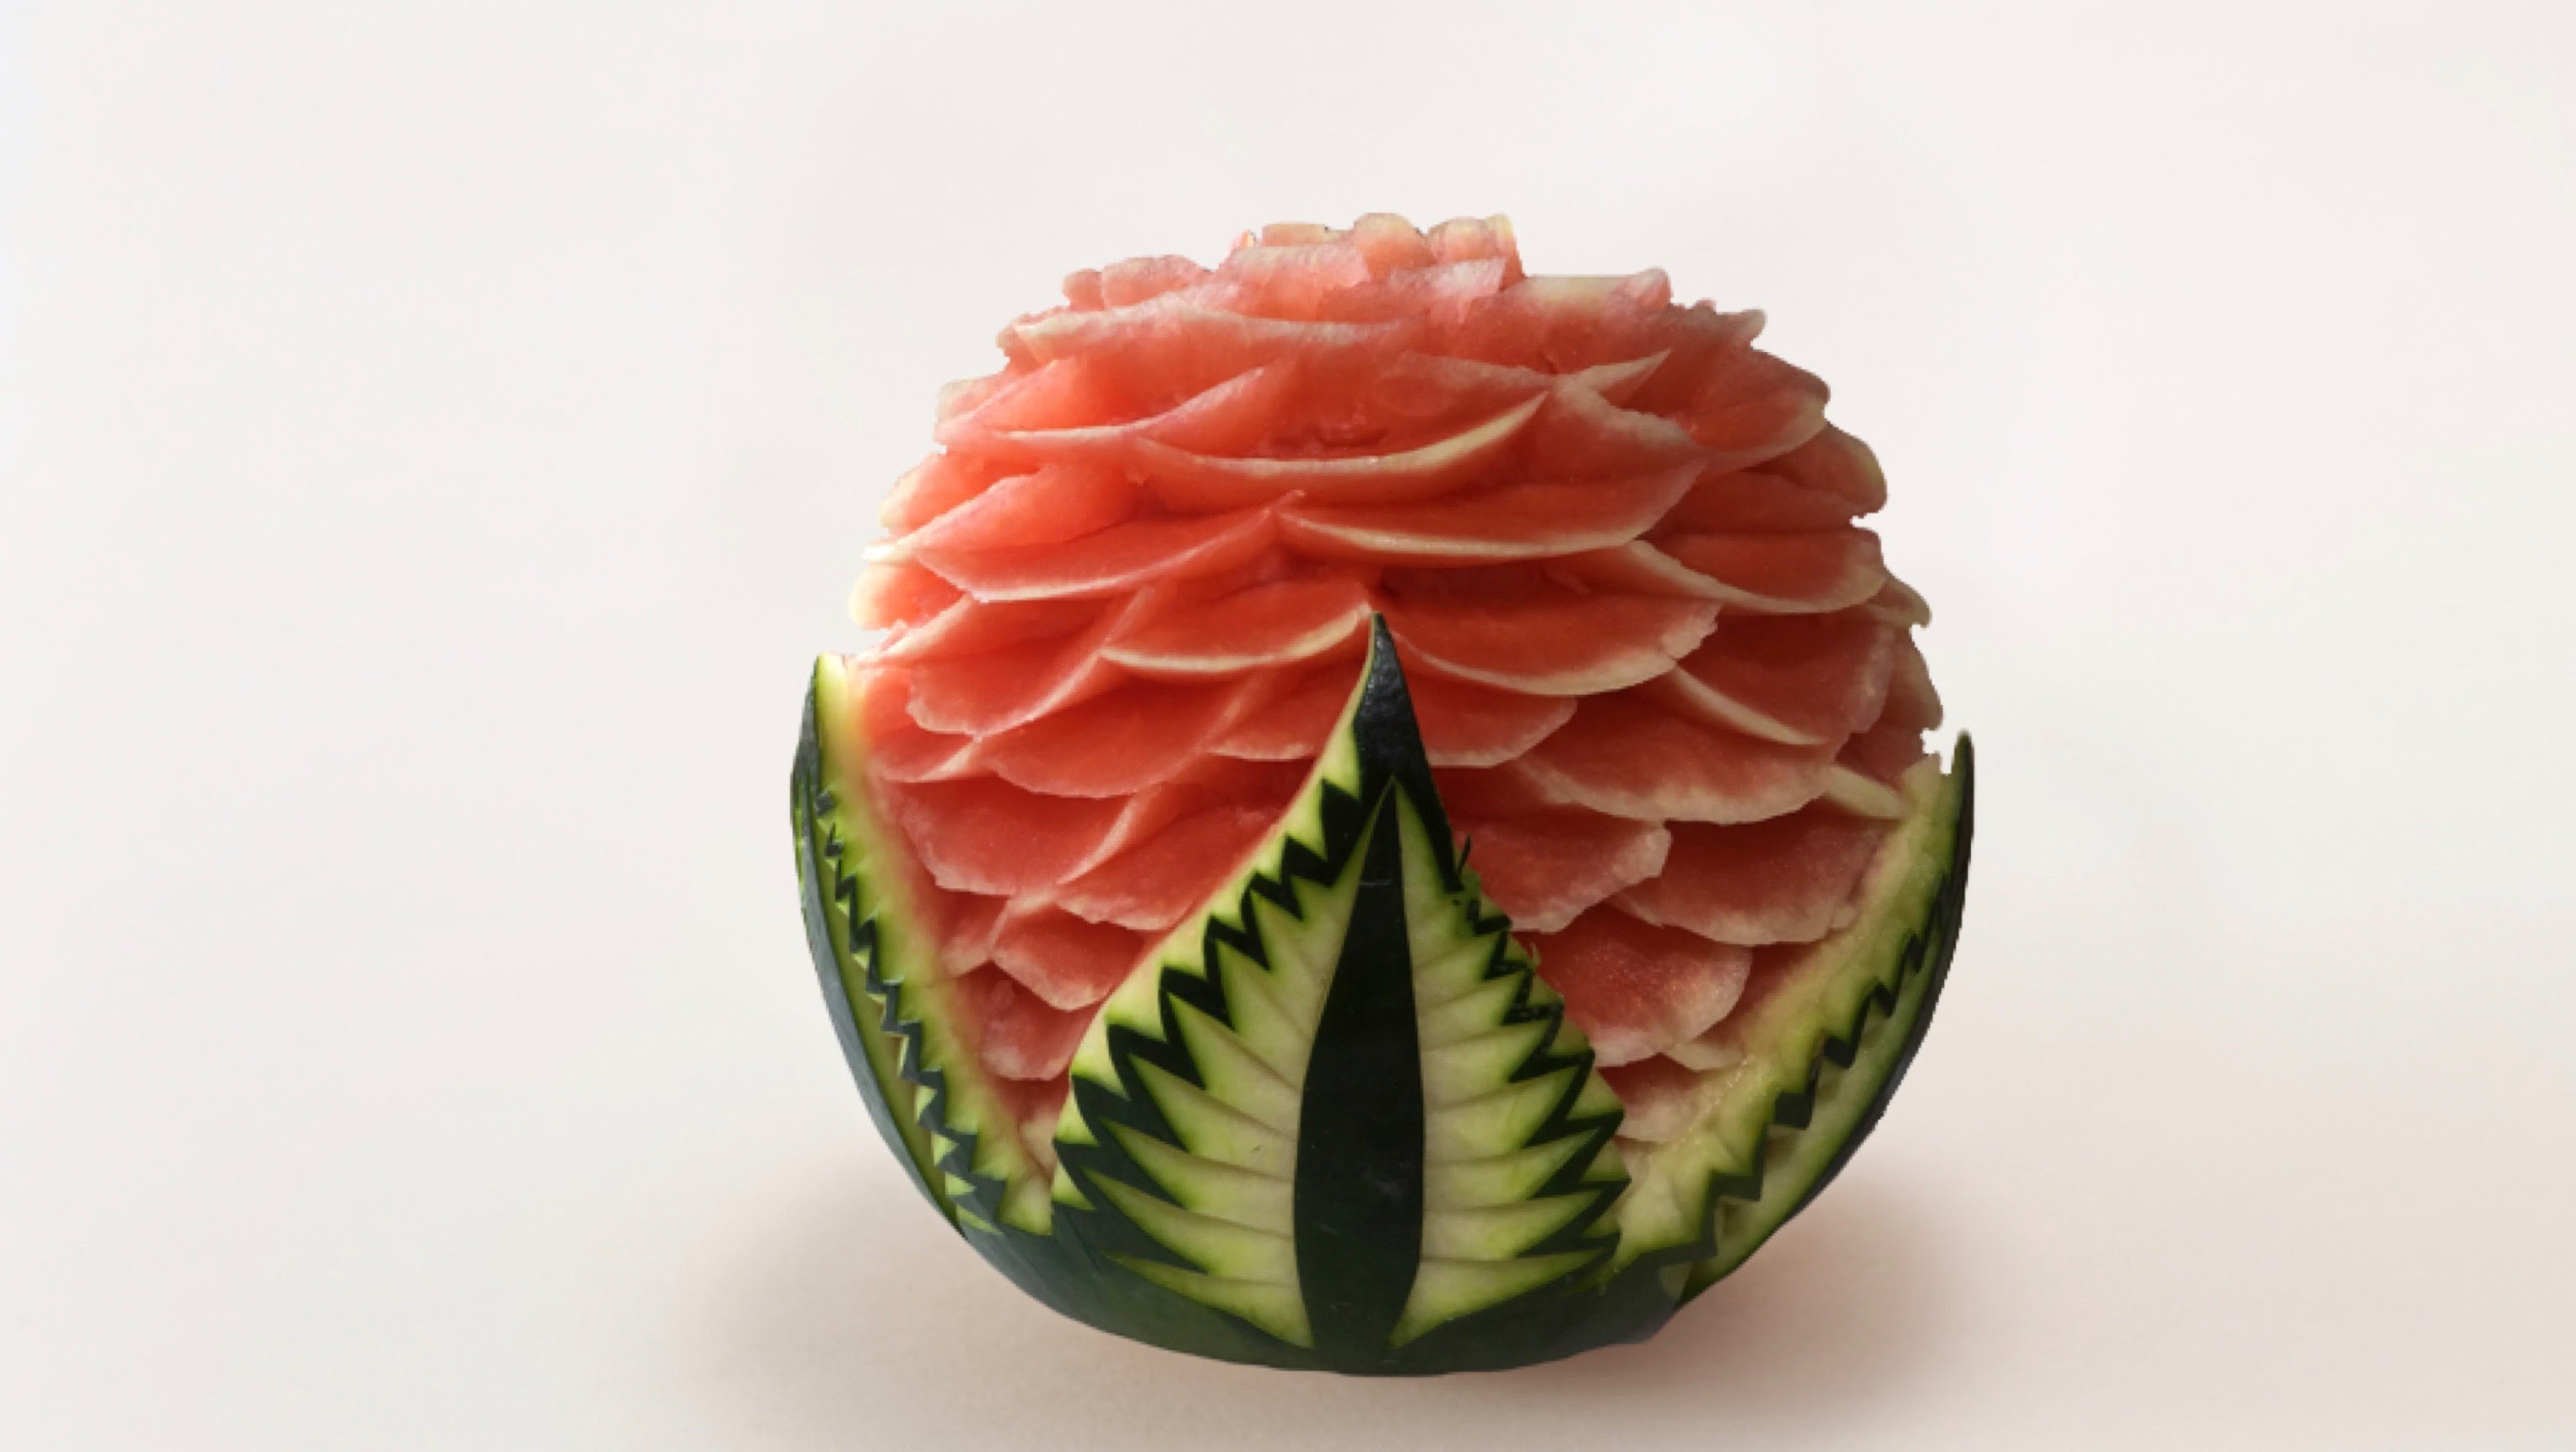 Watermelon Carved Model 3 By J Pereira Art Carving - YouTube